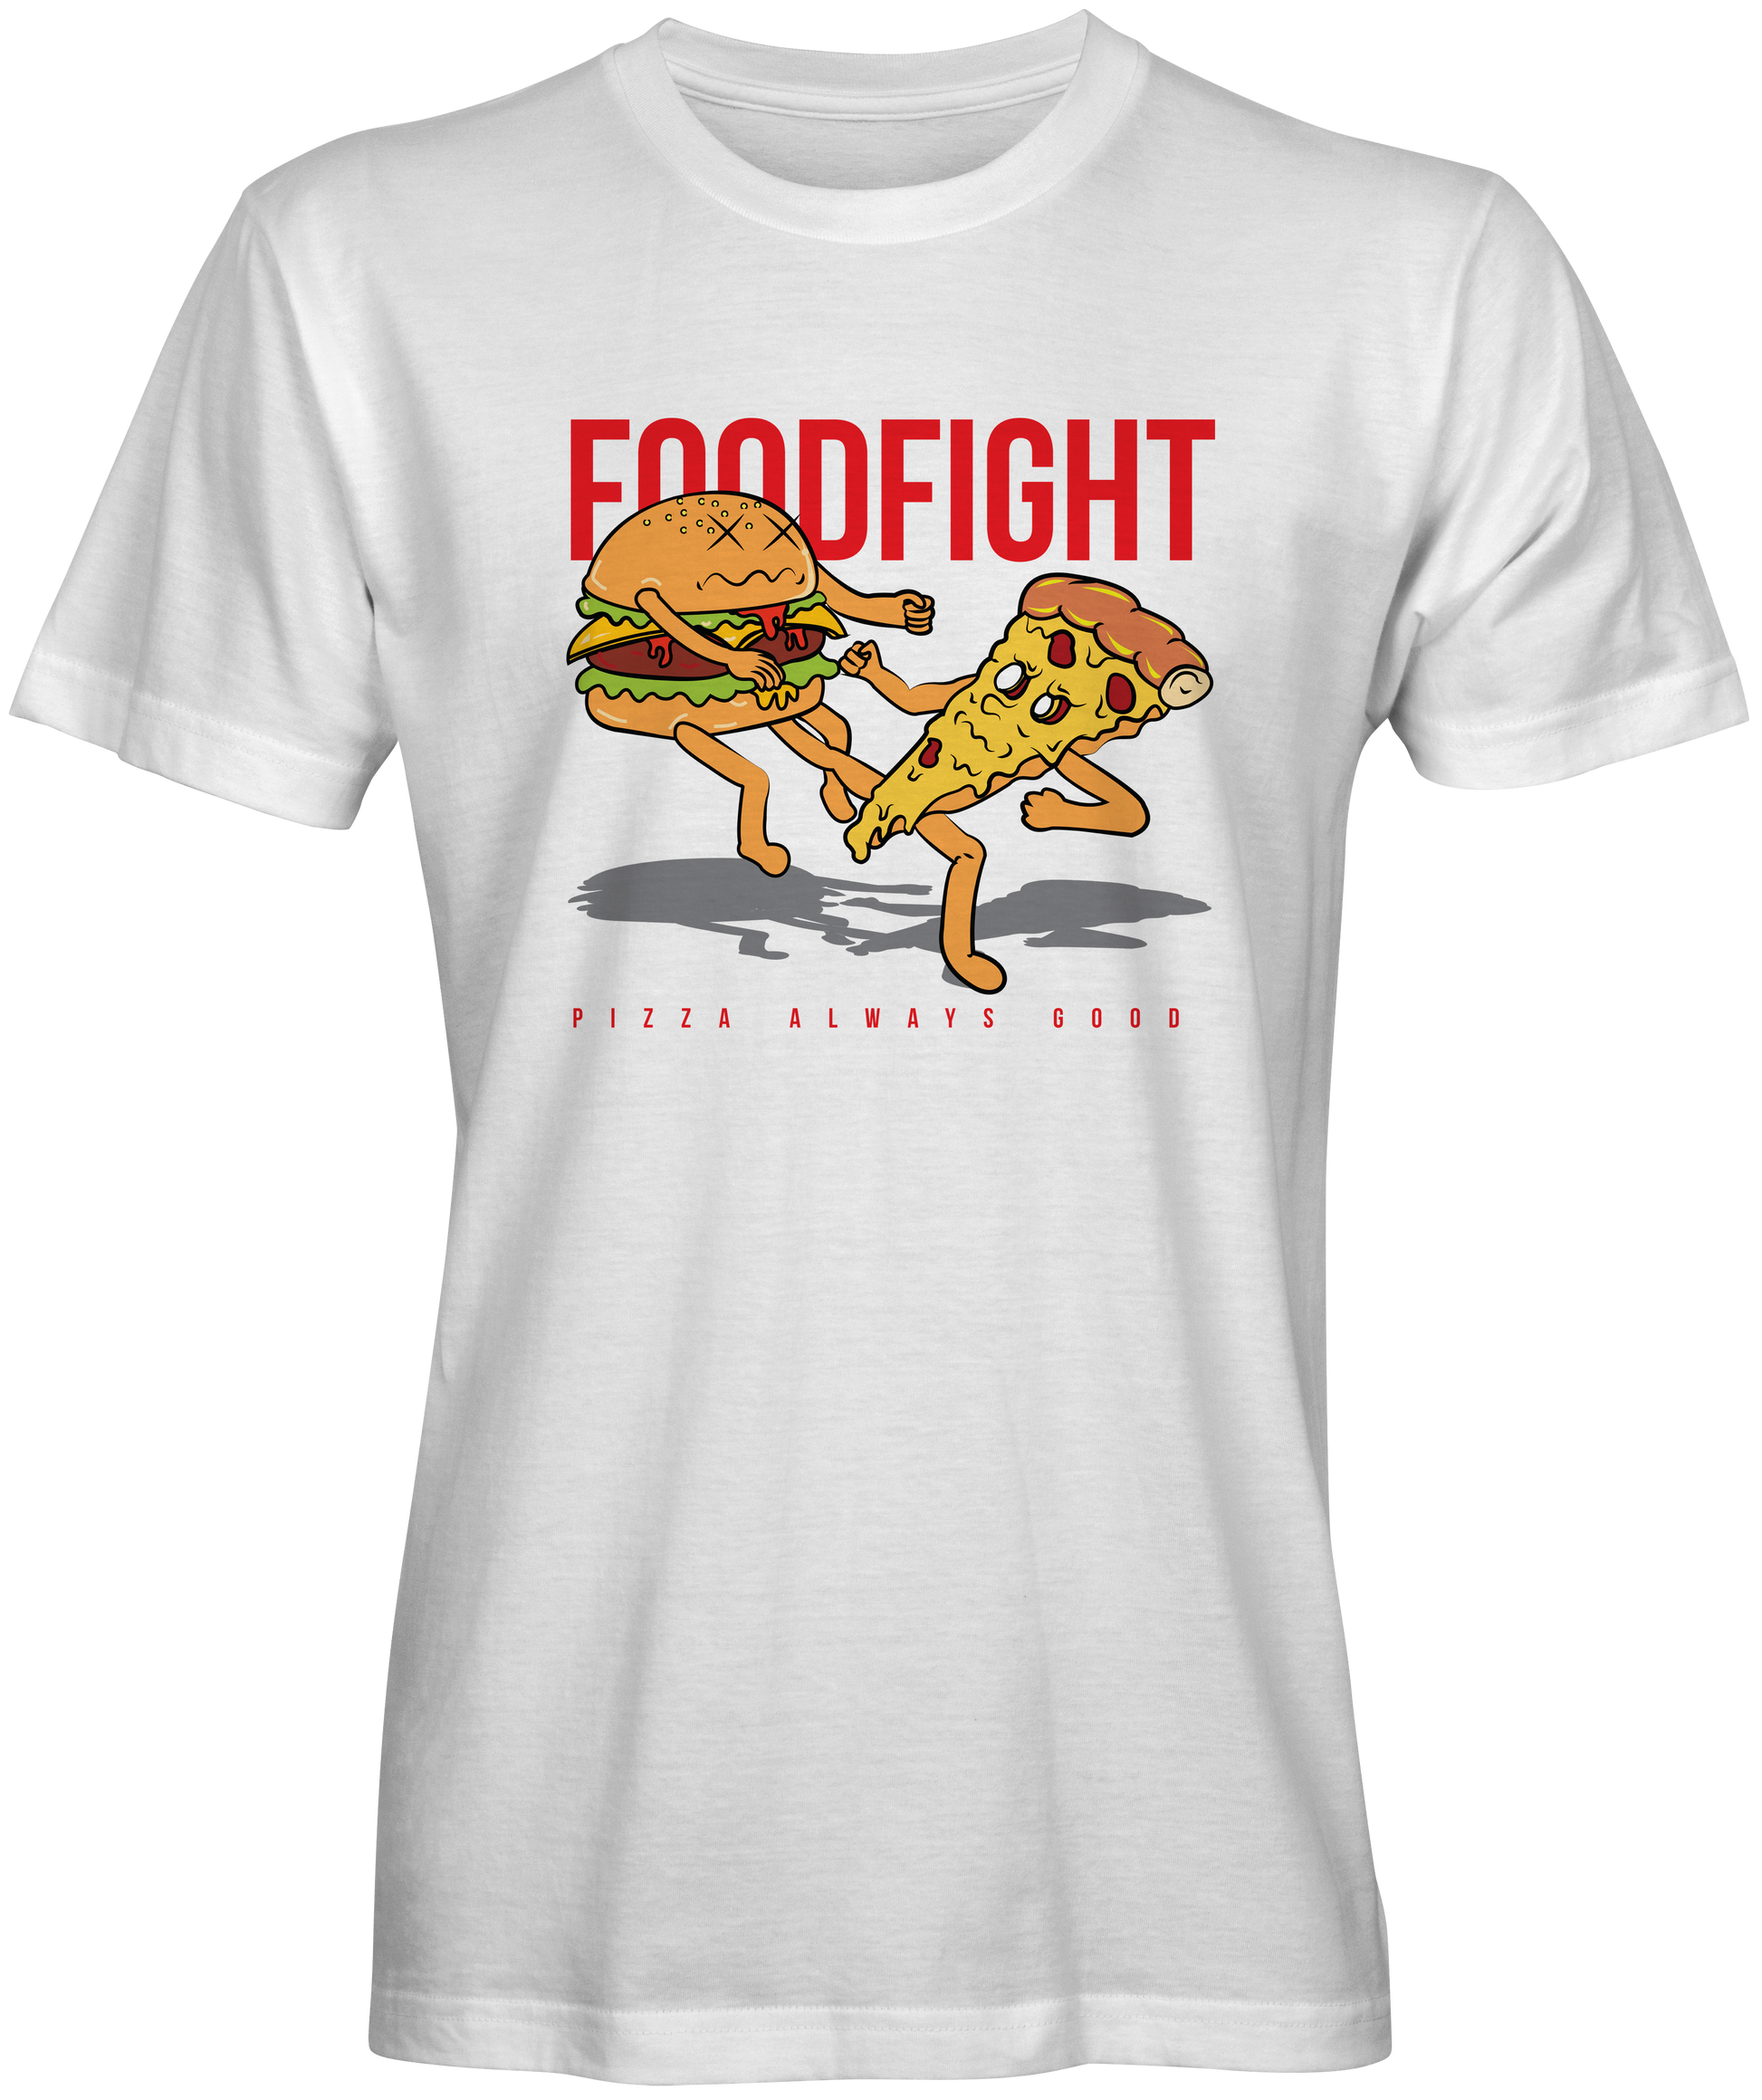 Food Fight T-shirt for Sale